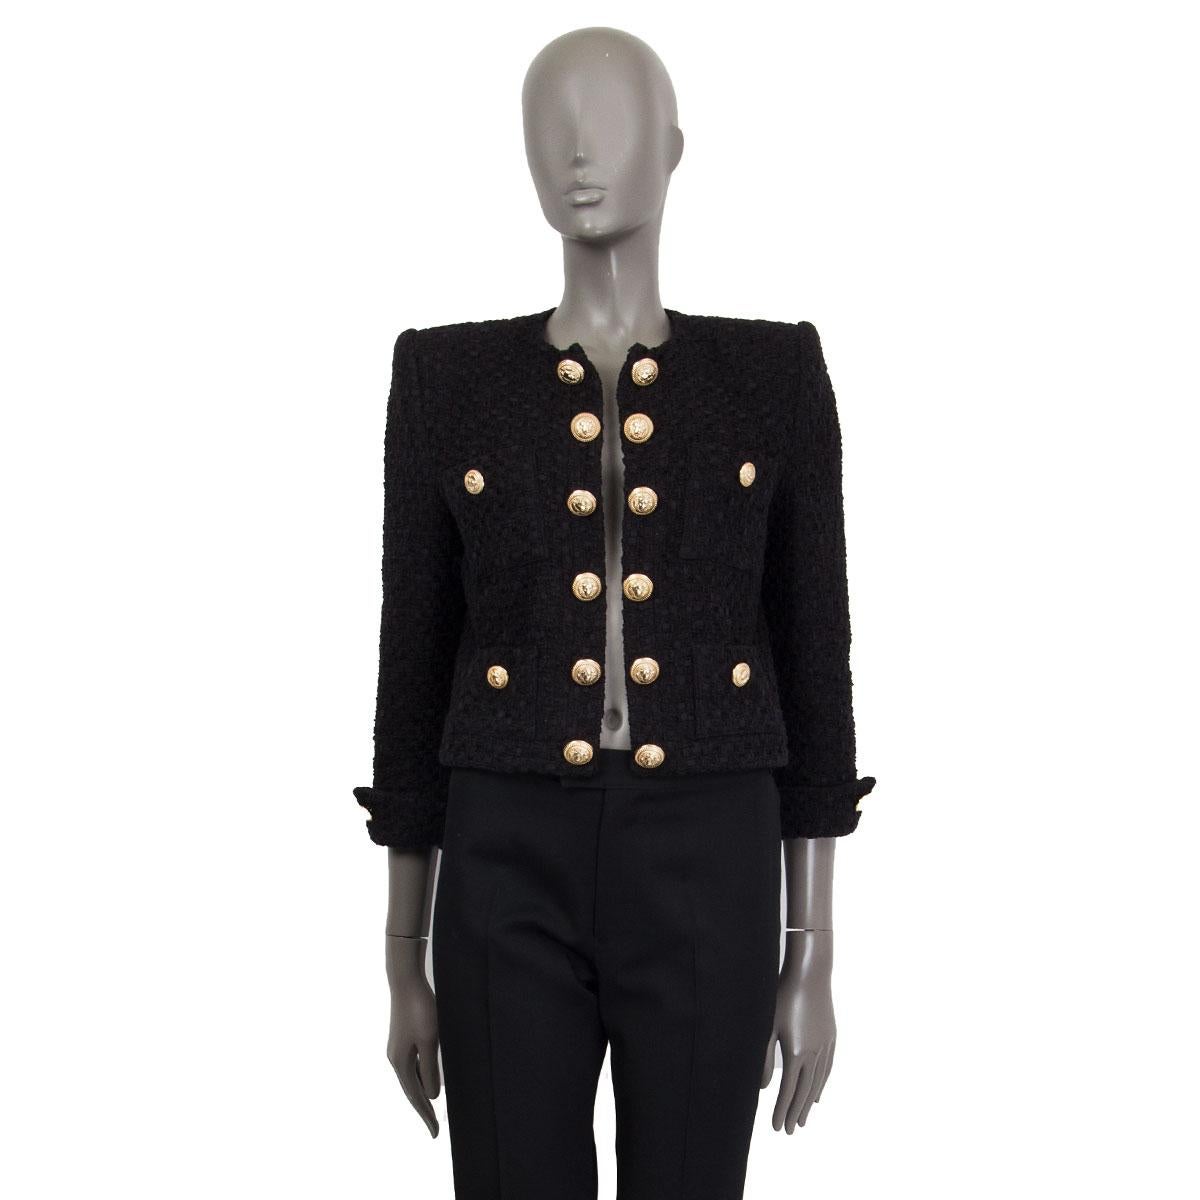 100% authentic Balmain cropped bouclé jacket in black cotton (48%), polyamide (24%), polyester (14%) and viscose (14%) featuring padded shoulders and breast pockets with crest-embossed button detail. The jacket can not be closed, crest-embossed